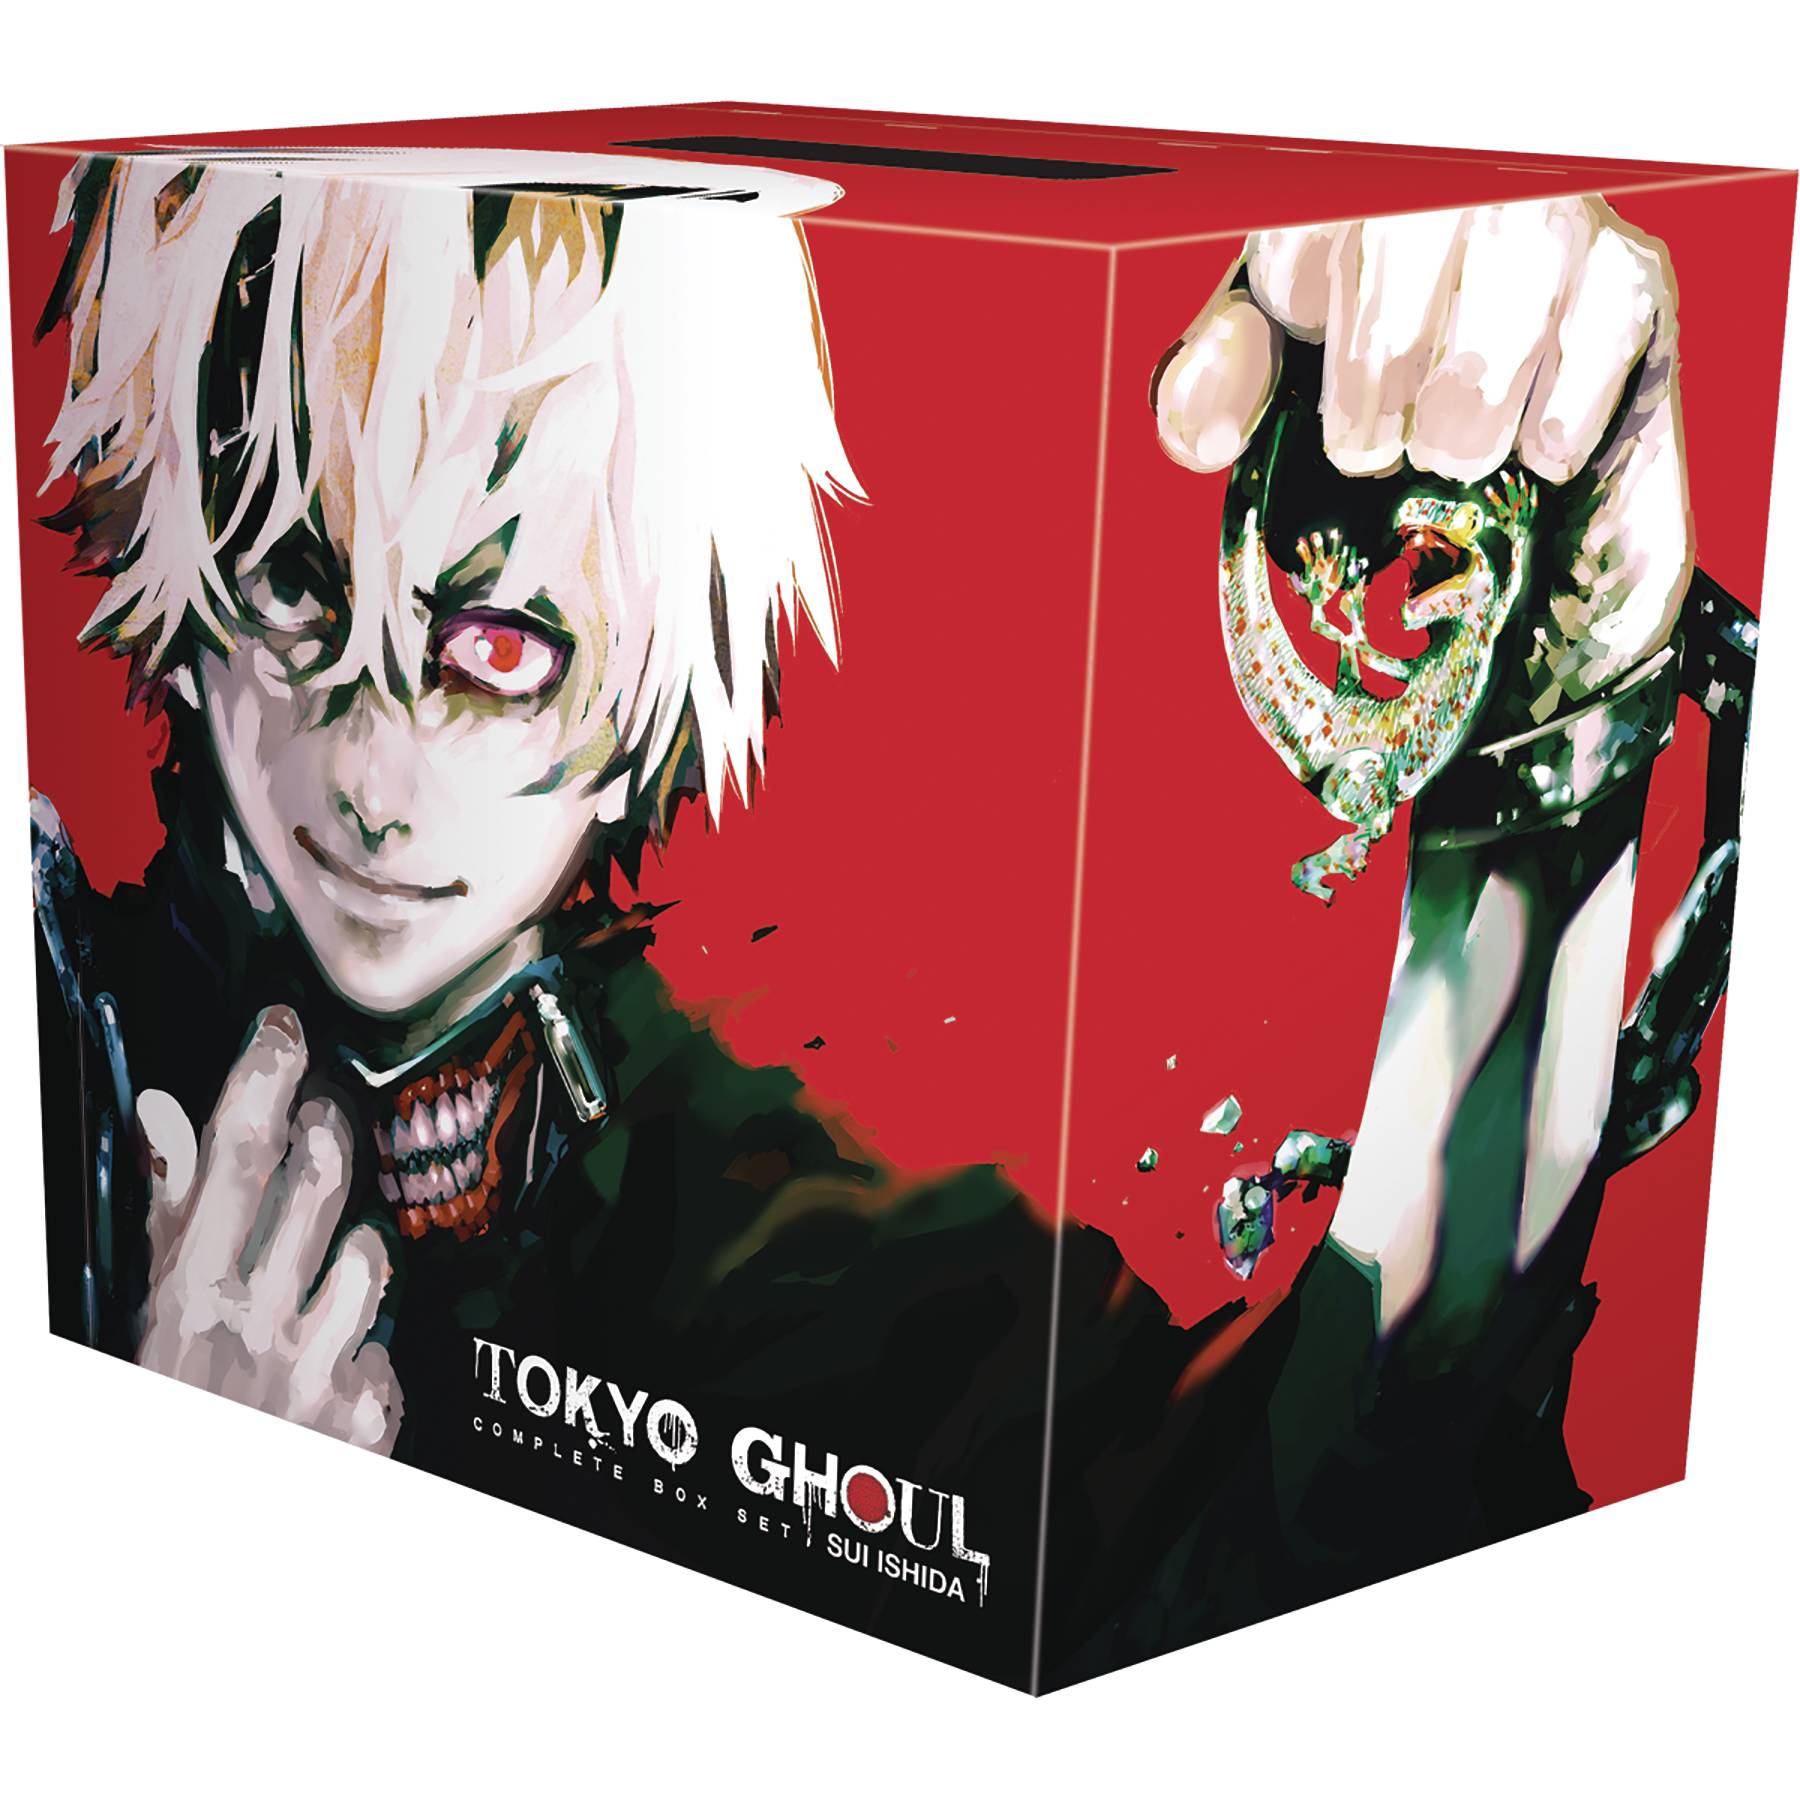 Tokyo Ghoul: The Complete Boxset